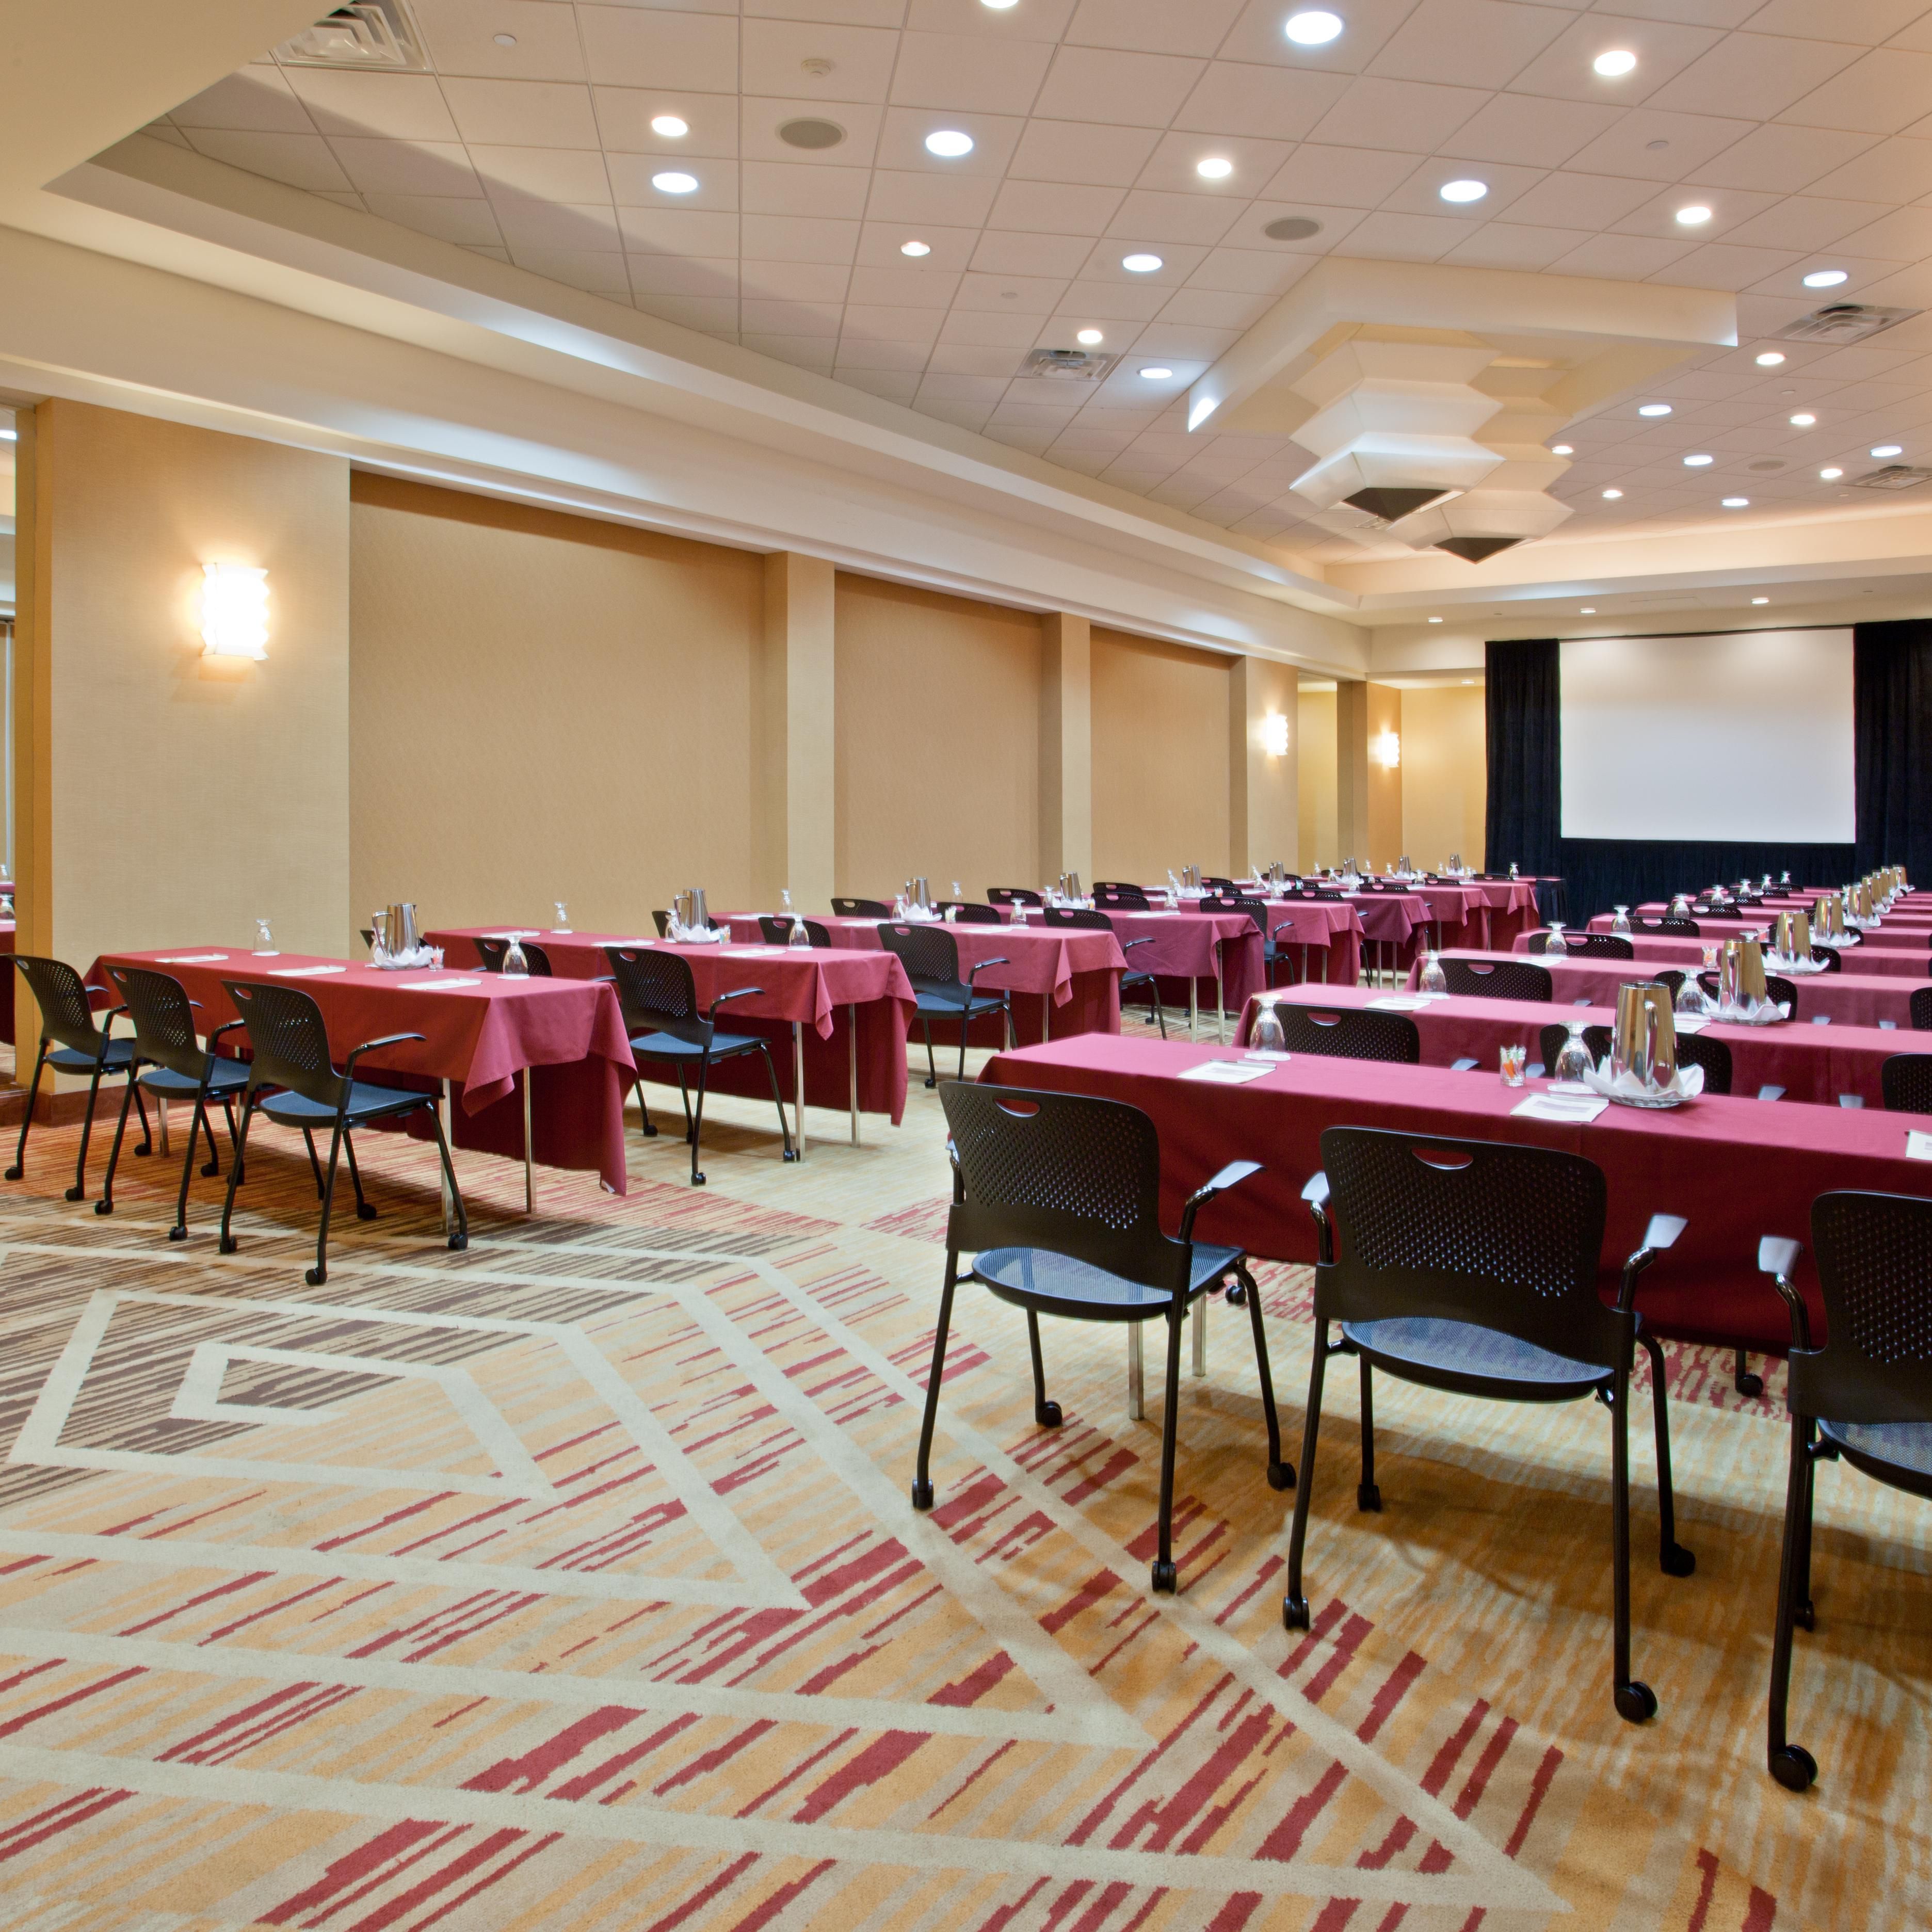 With flexible meeting spaces, we have the right set-up for you.